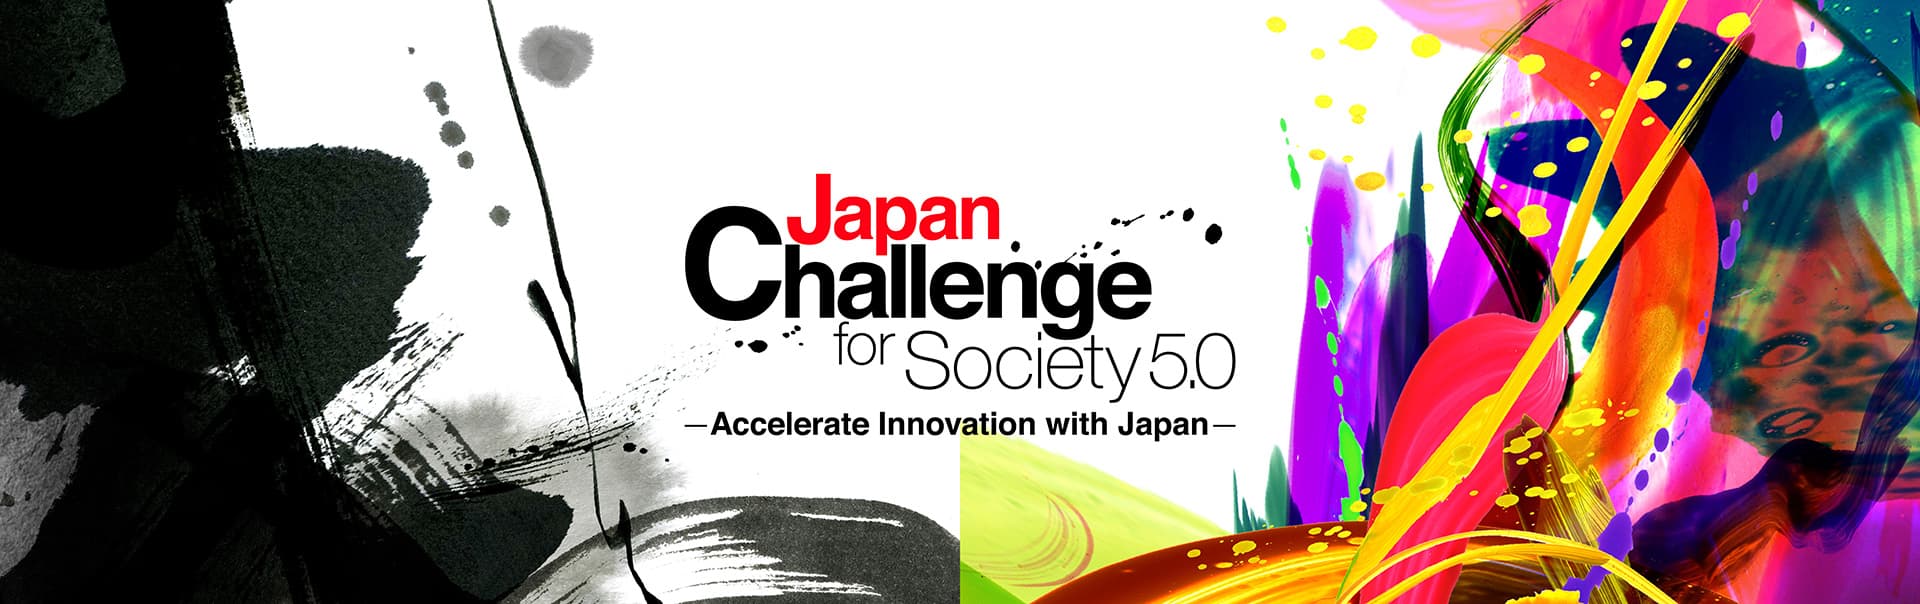 Japan Challenge for Society 5.0 : Accelerate Innovation with Japan